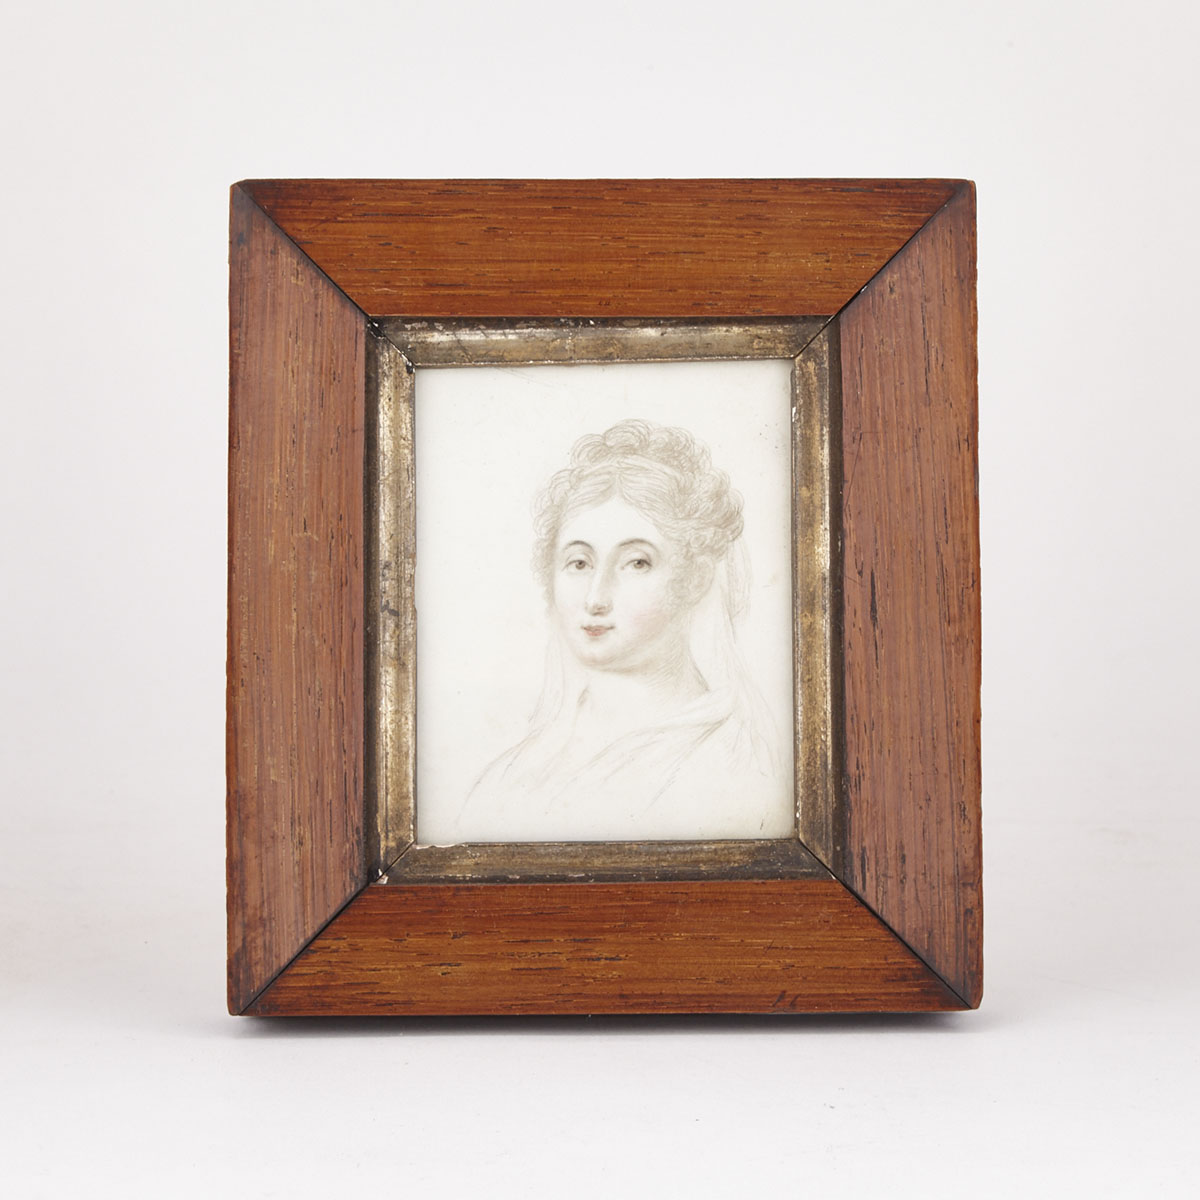 Portrait Miniature of a Lady, early-mid 19th century